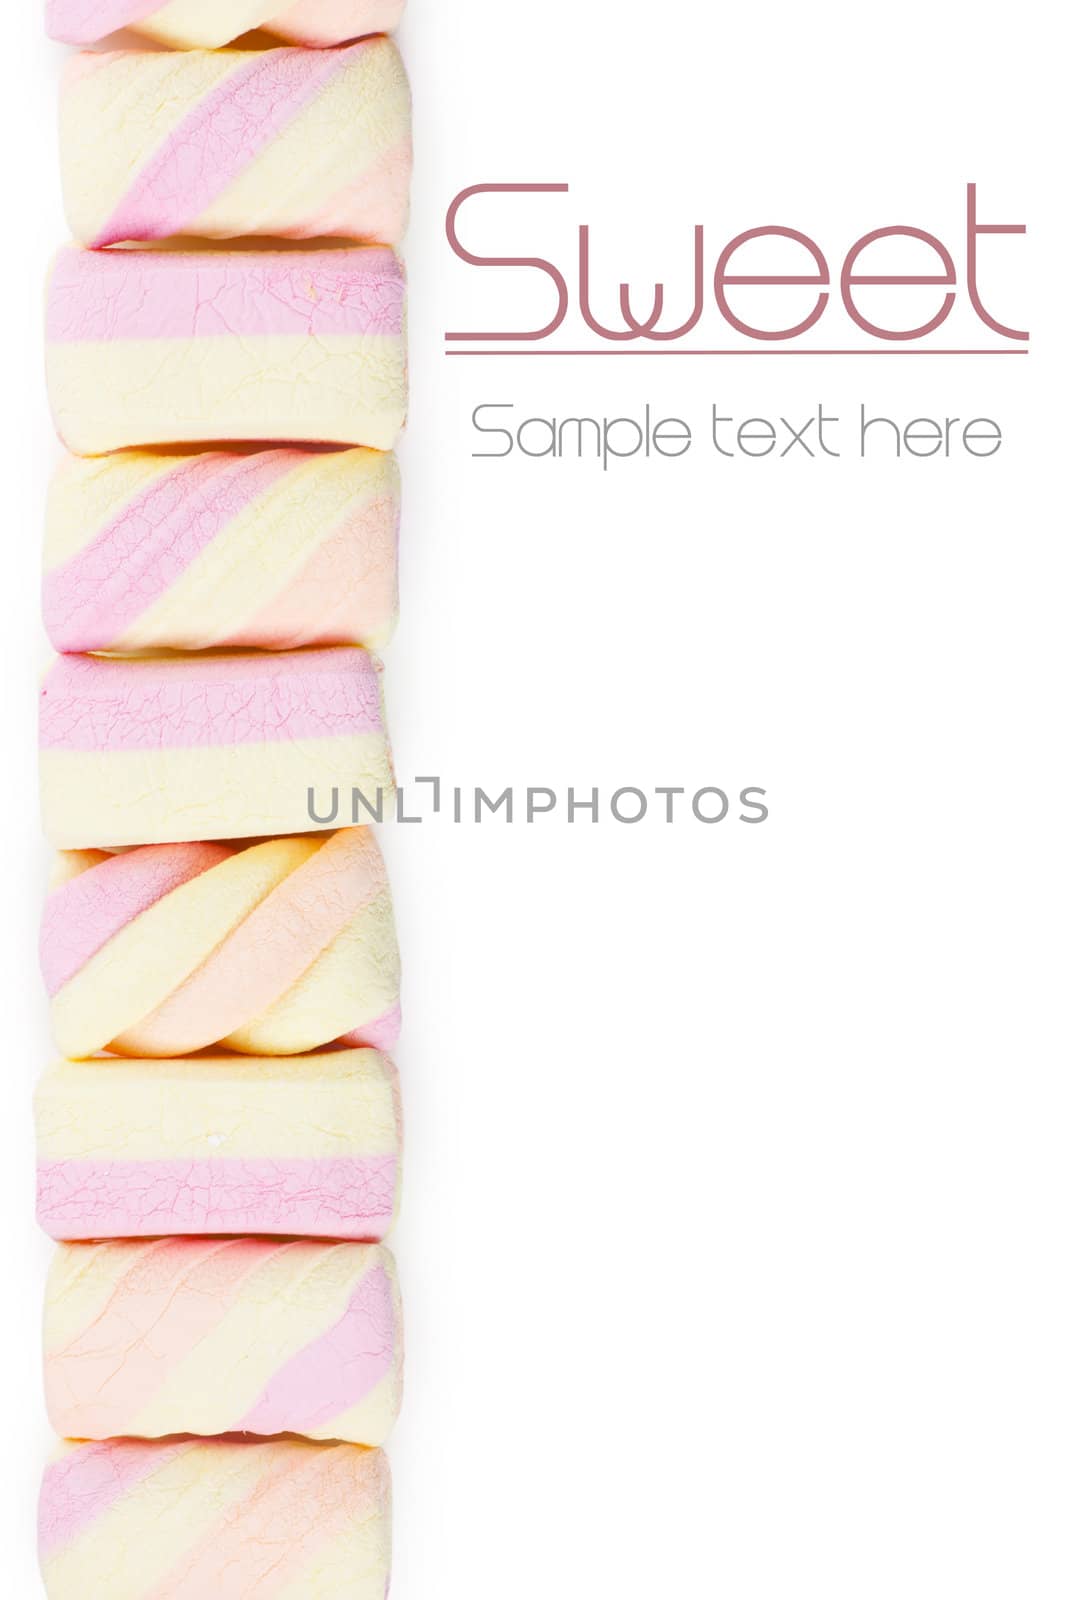 A row of colorful marshmallows with sample text